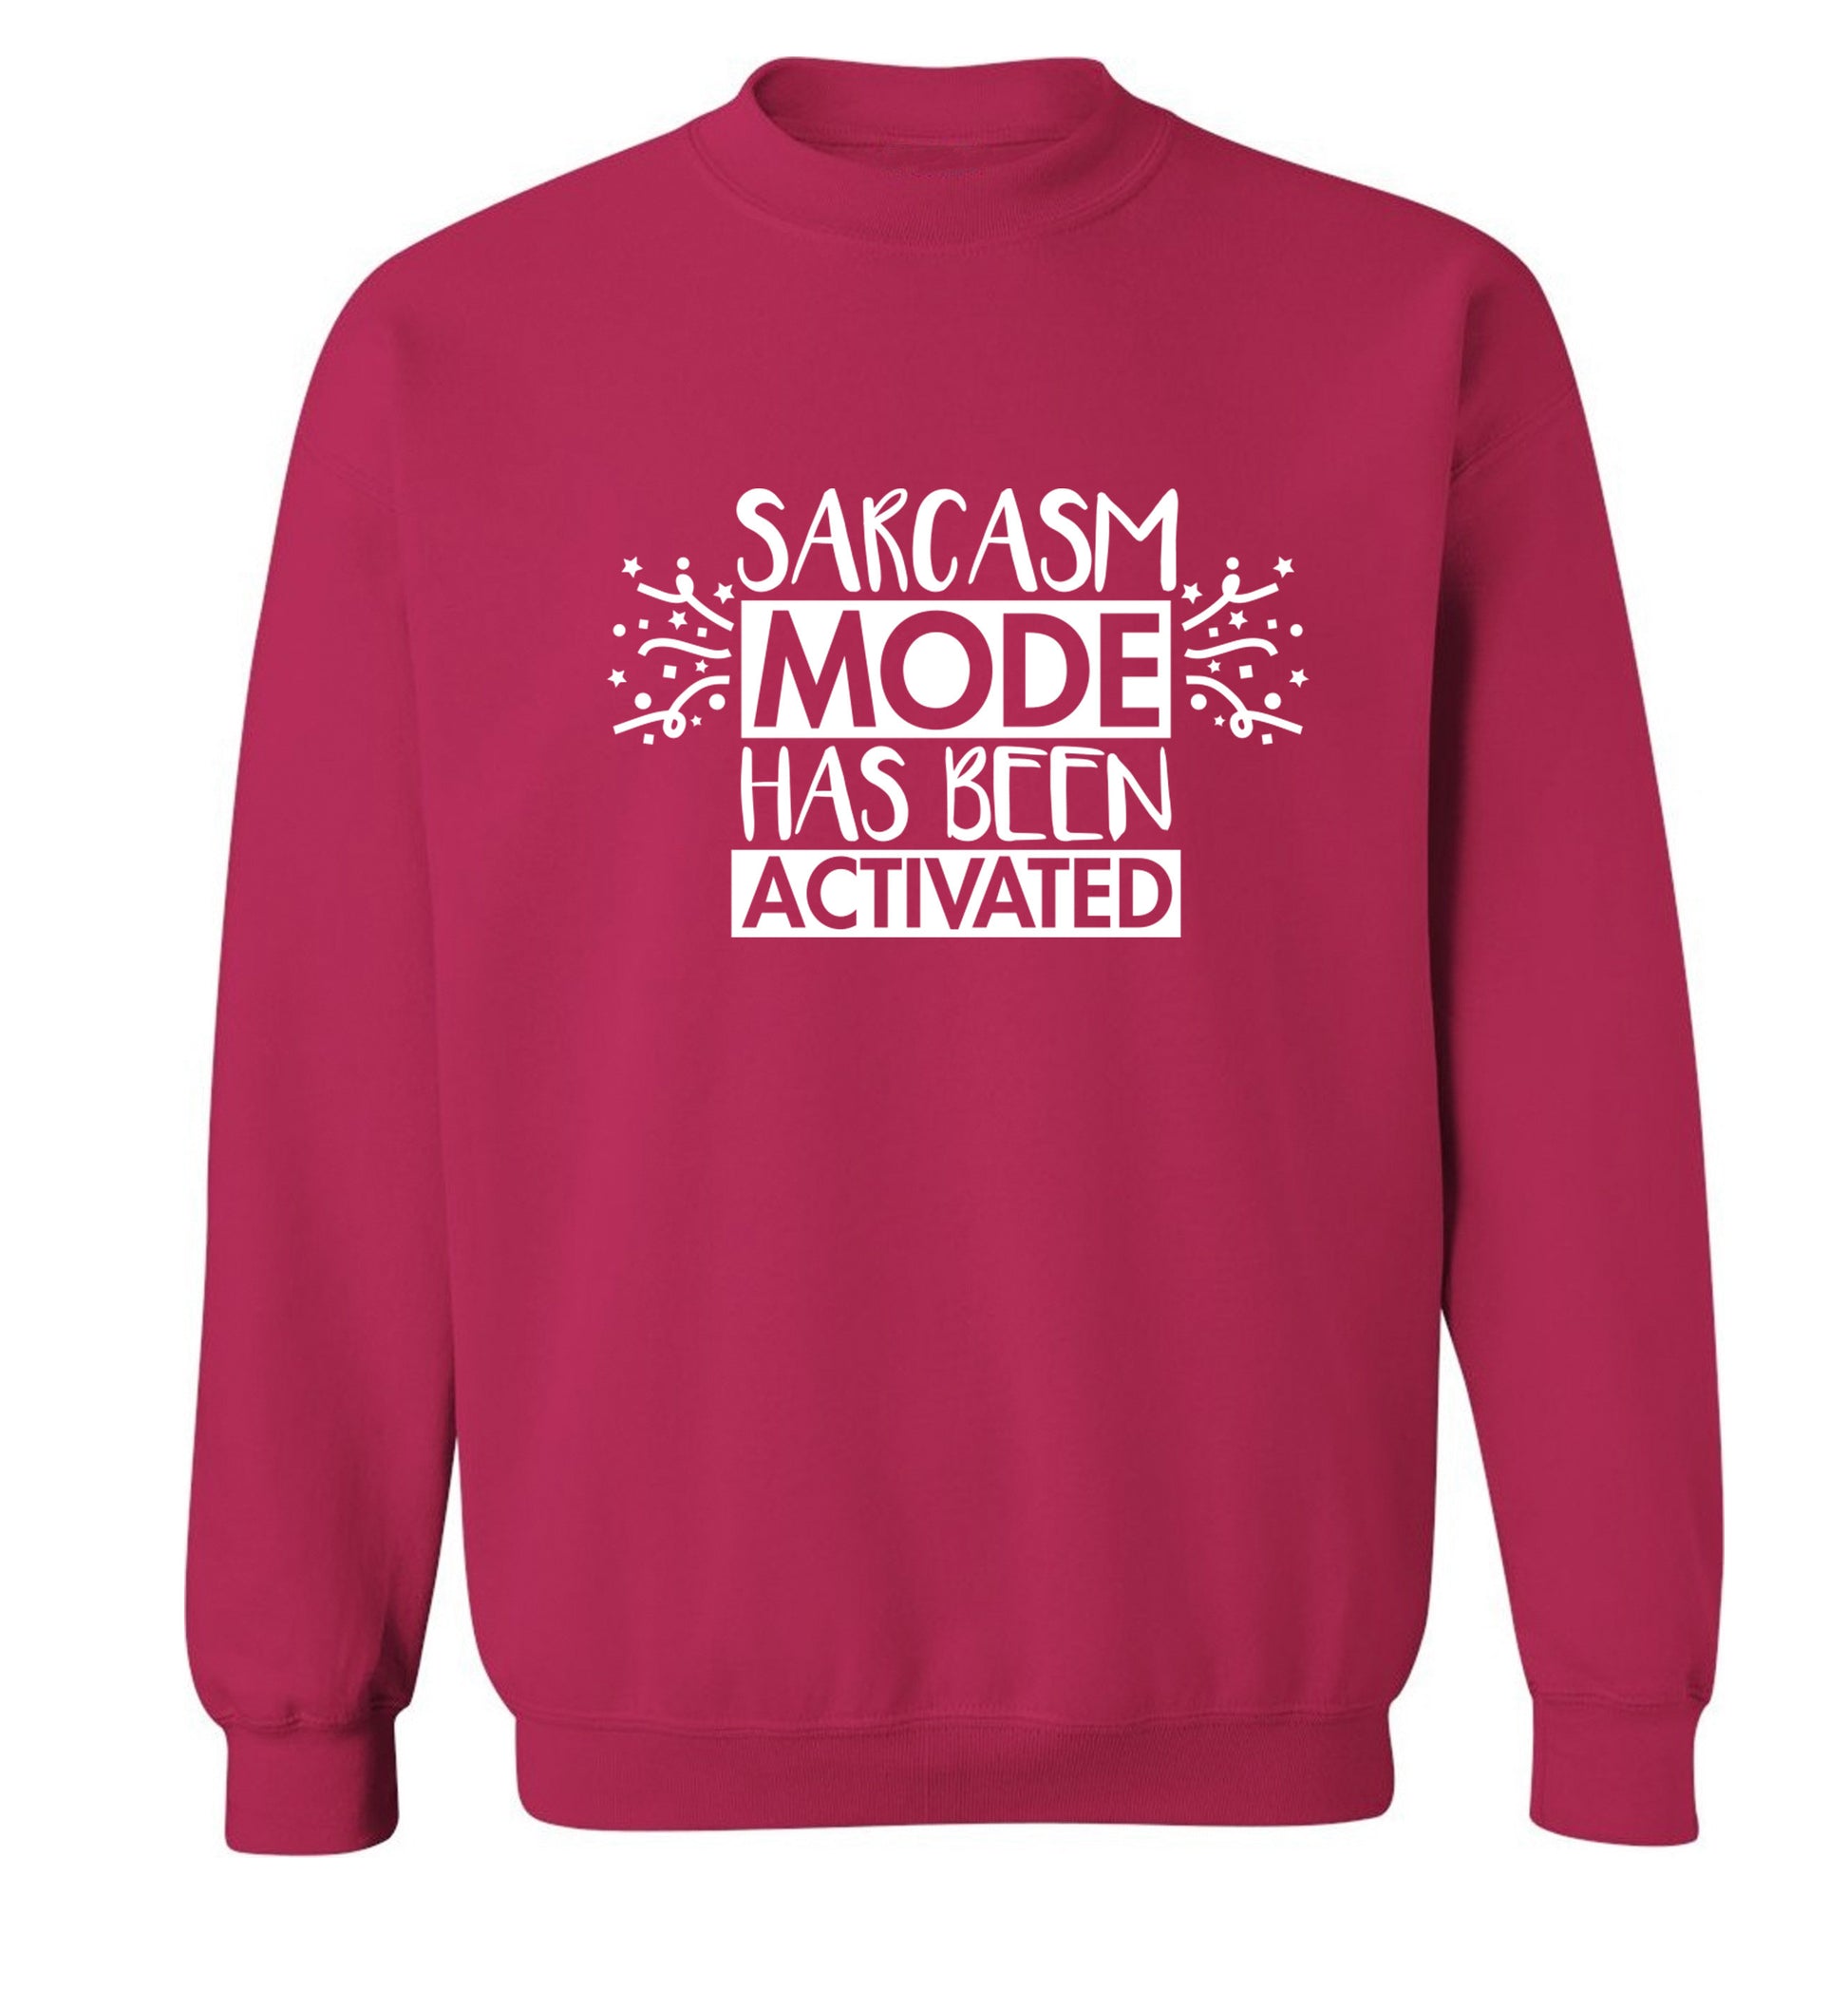 Sarcarsm mode has been activated Adult's unisex pink Sweater 2XL